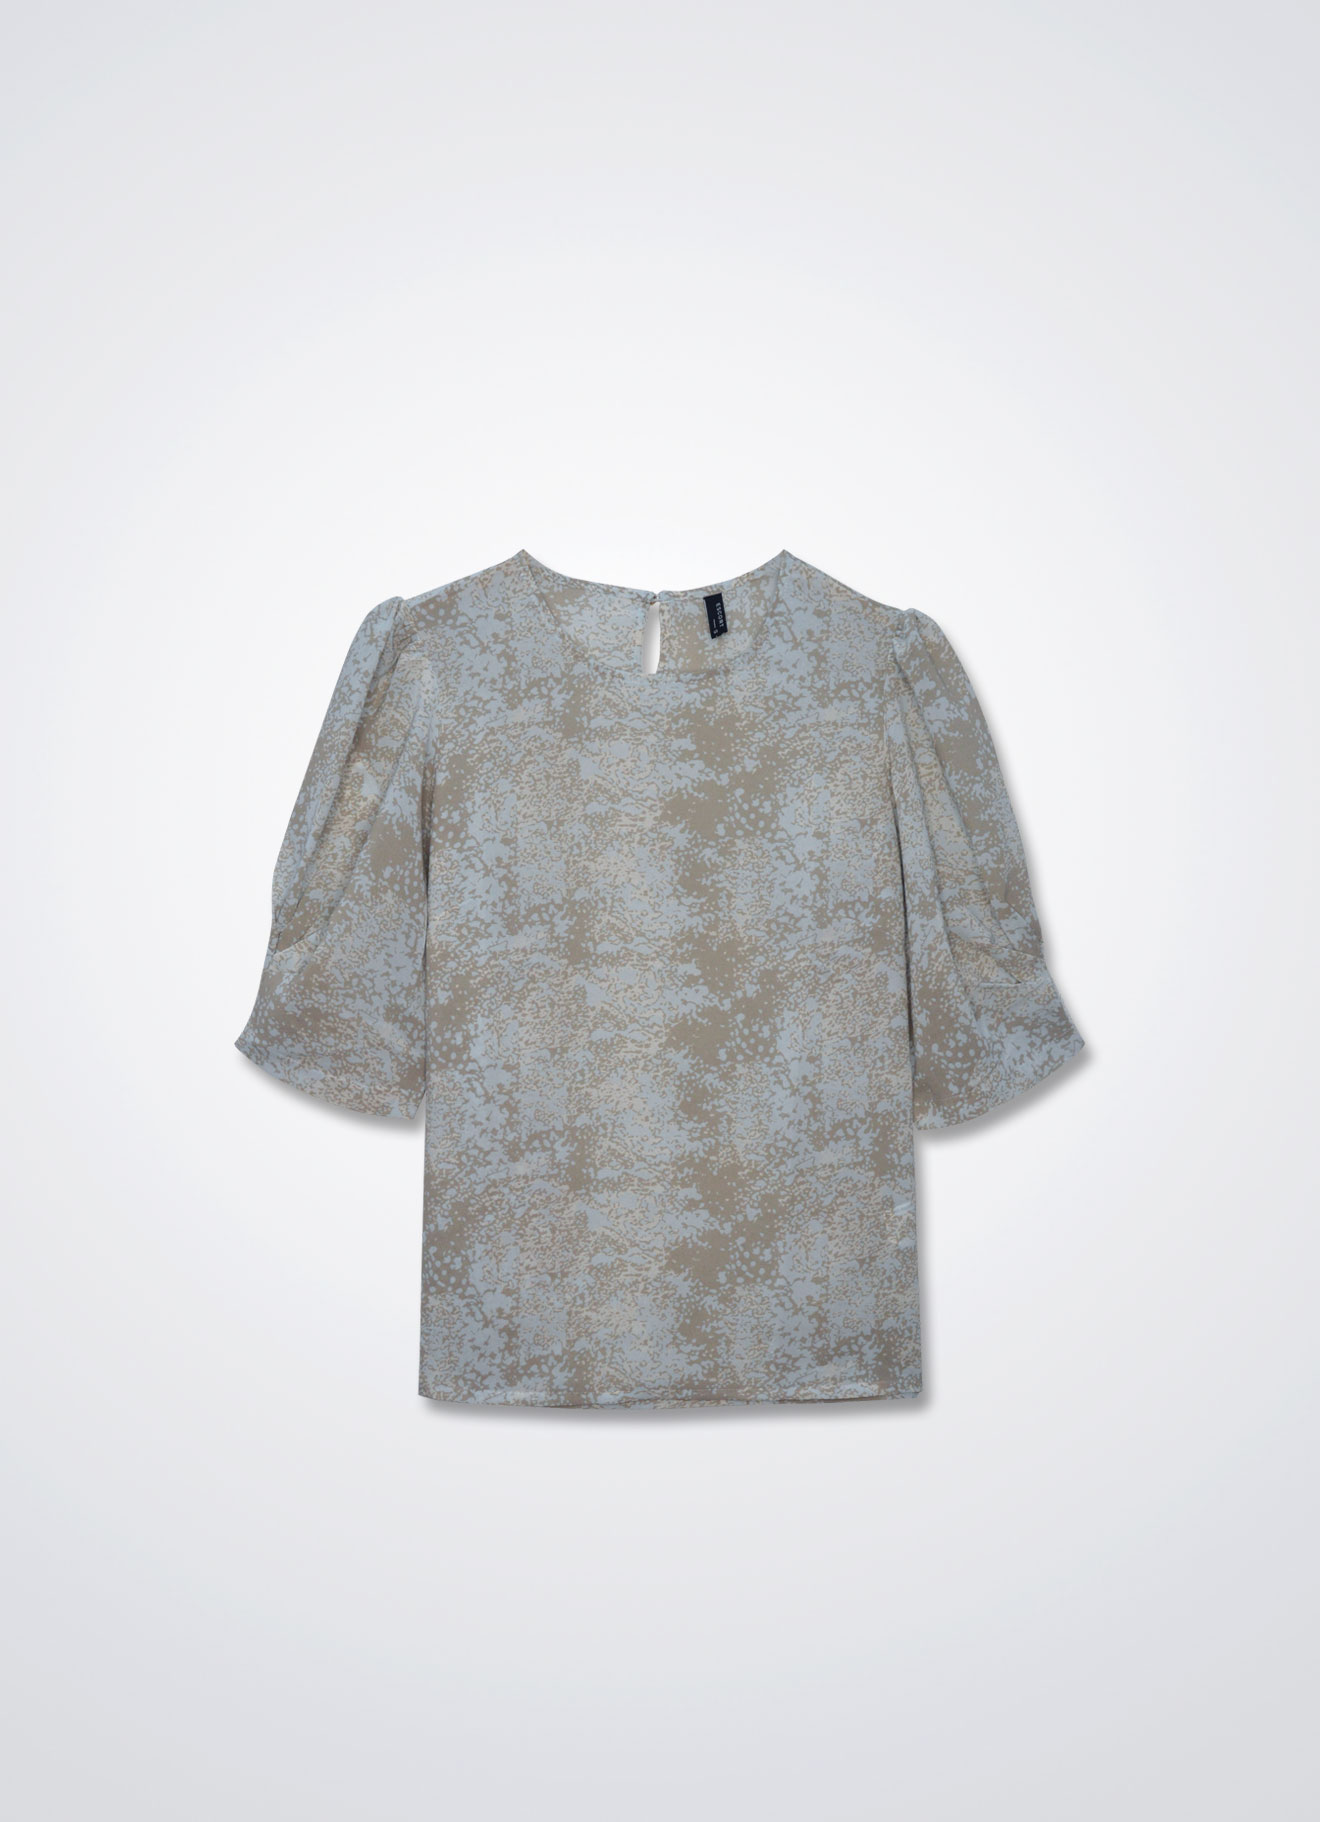 Illusion-Blue by Floral Printed Blouse